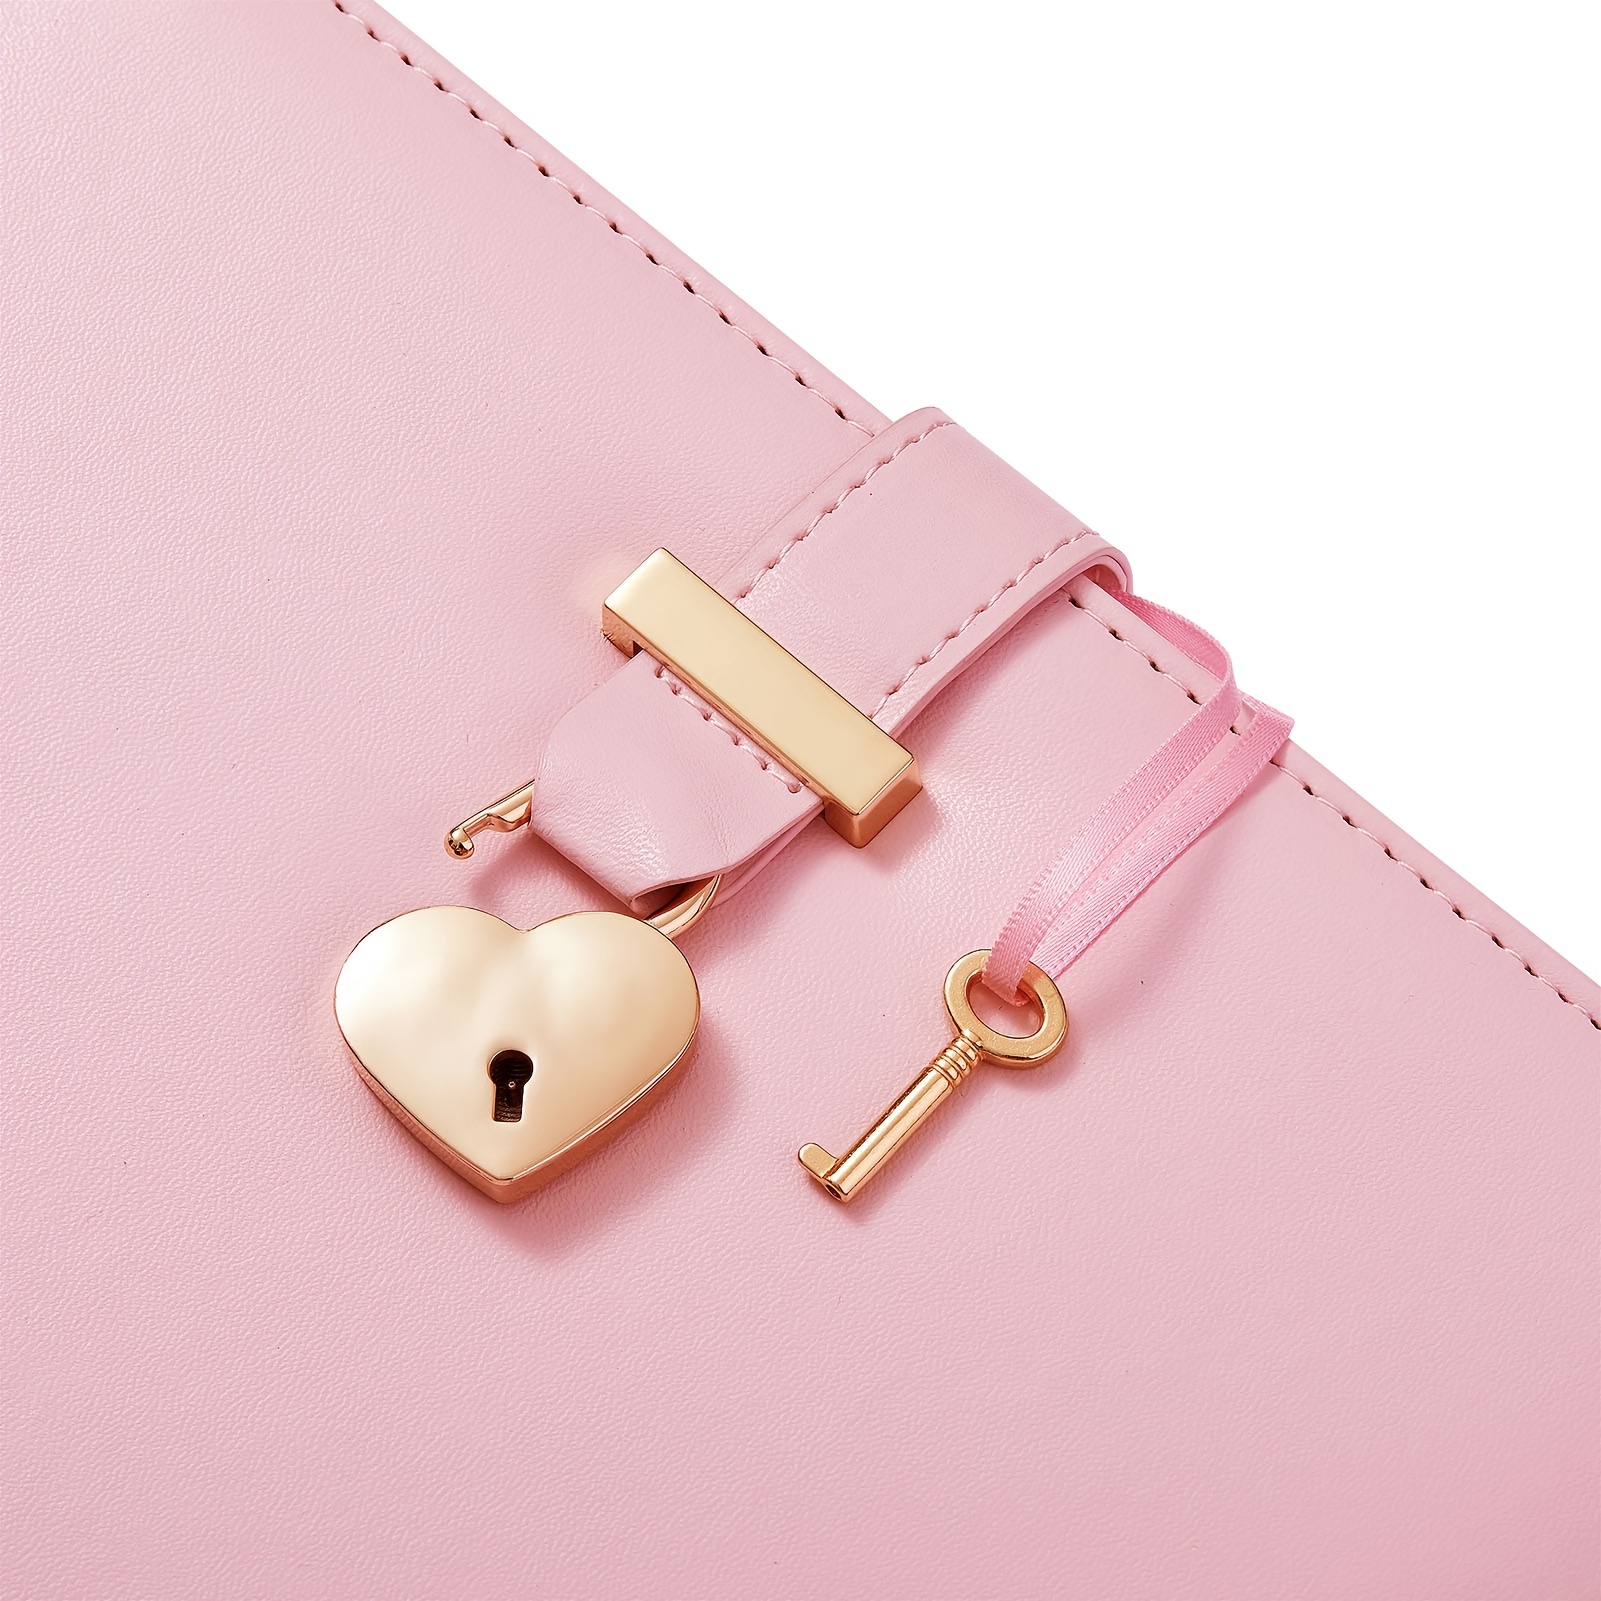 Girls Diary With Lock And Key For Girls Secret Kids Journals For Girls Pink  Heart Locking Journal Faux Leather Gold Lined Notebook With Pen Teen Women